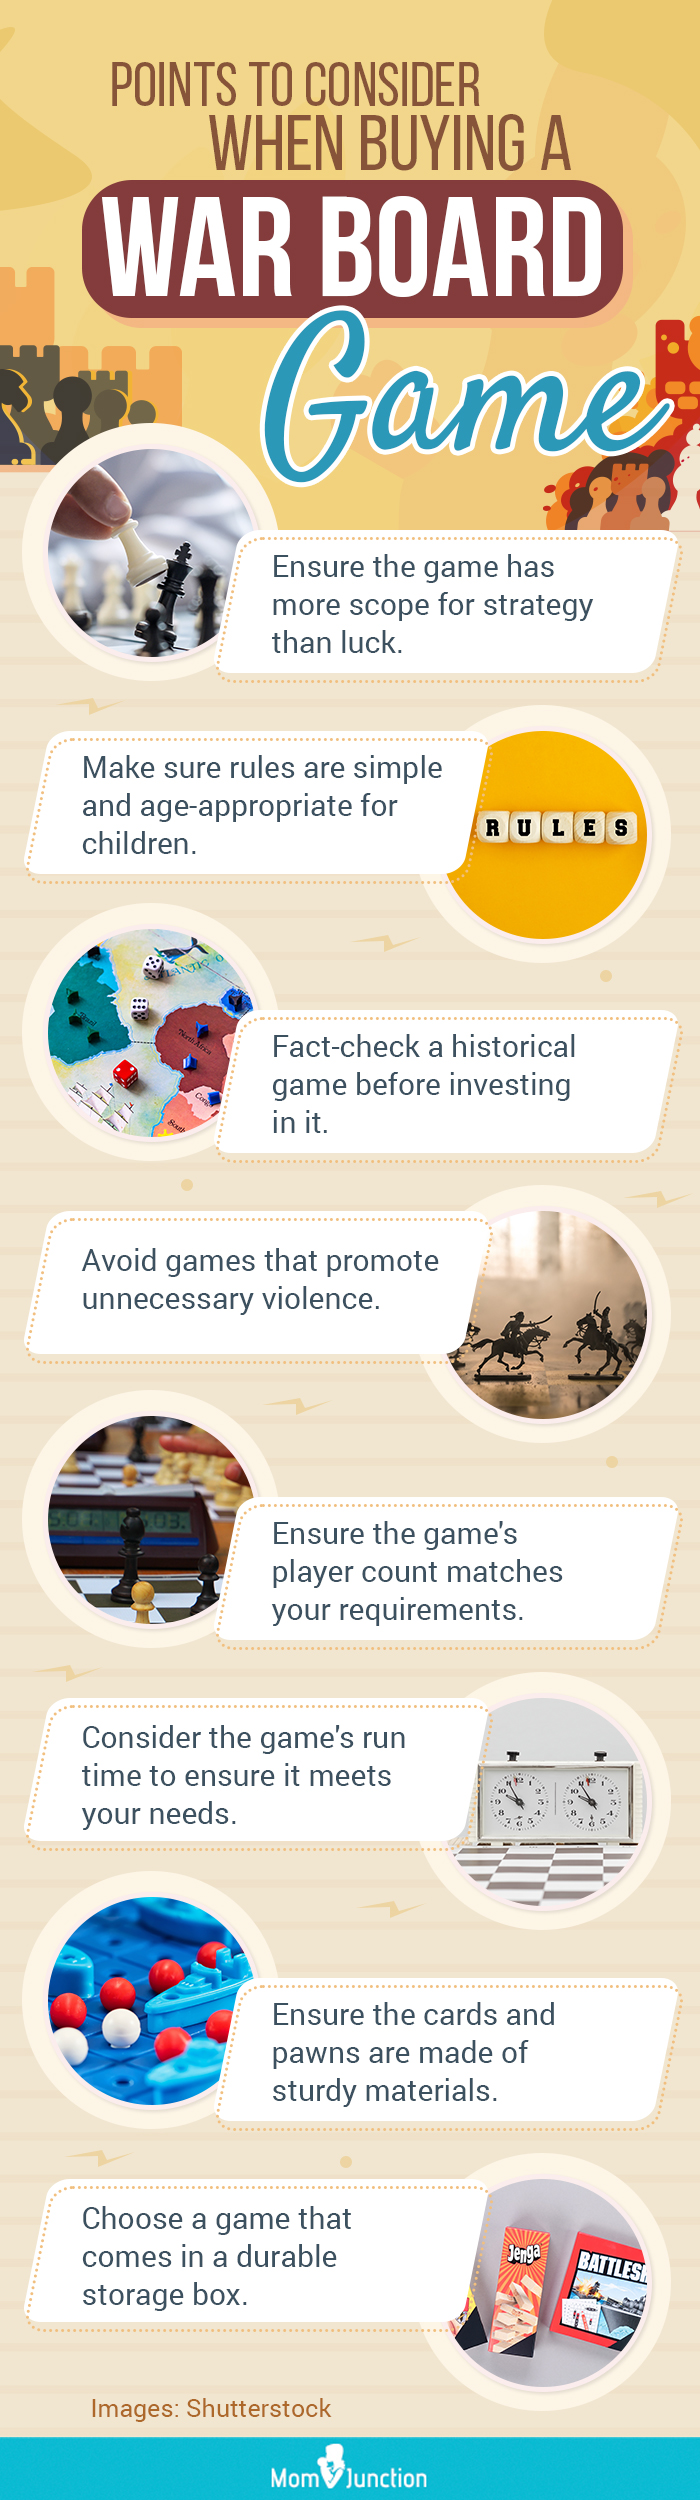 Points To Consider When Buying A War Board Game (infographic)